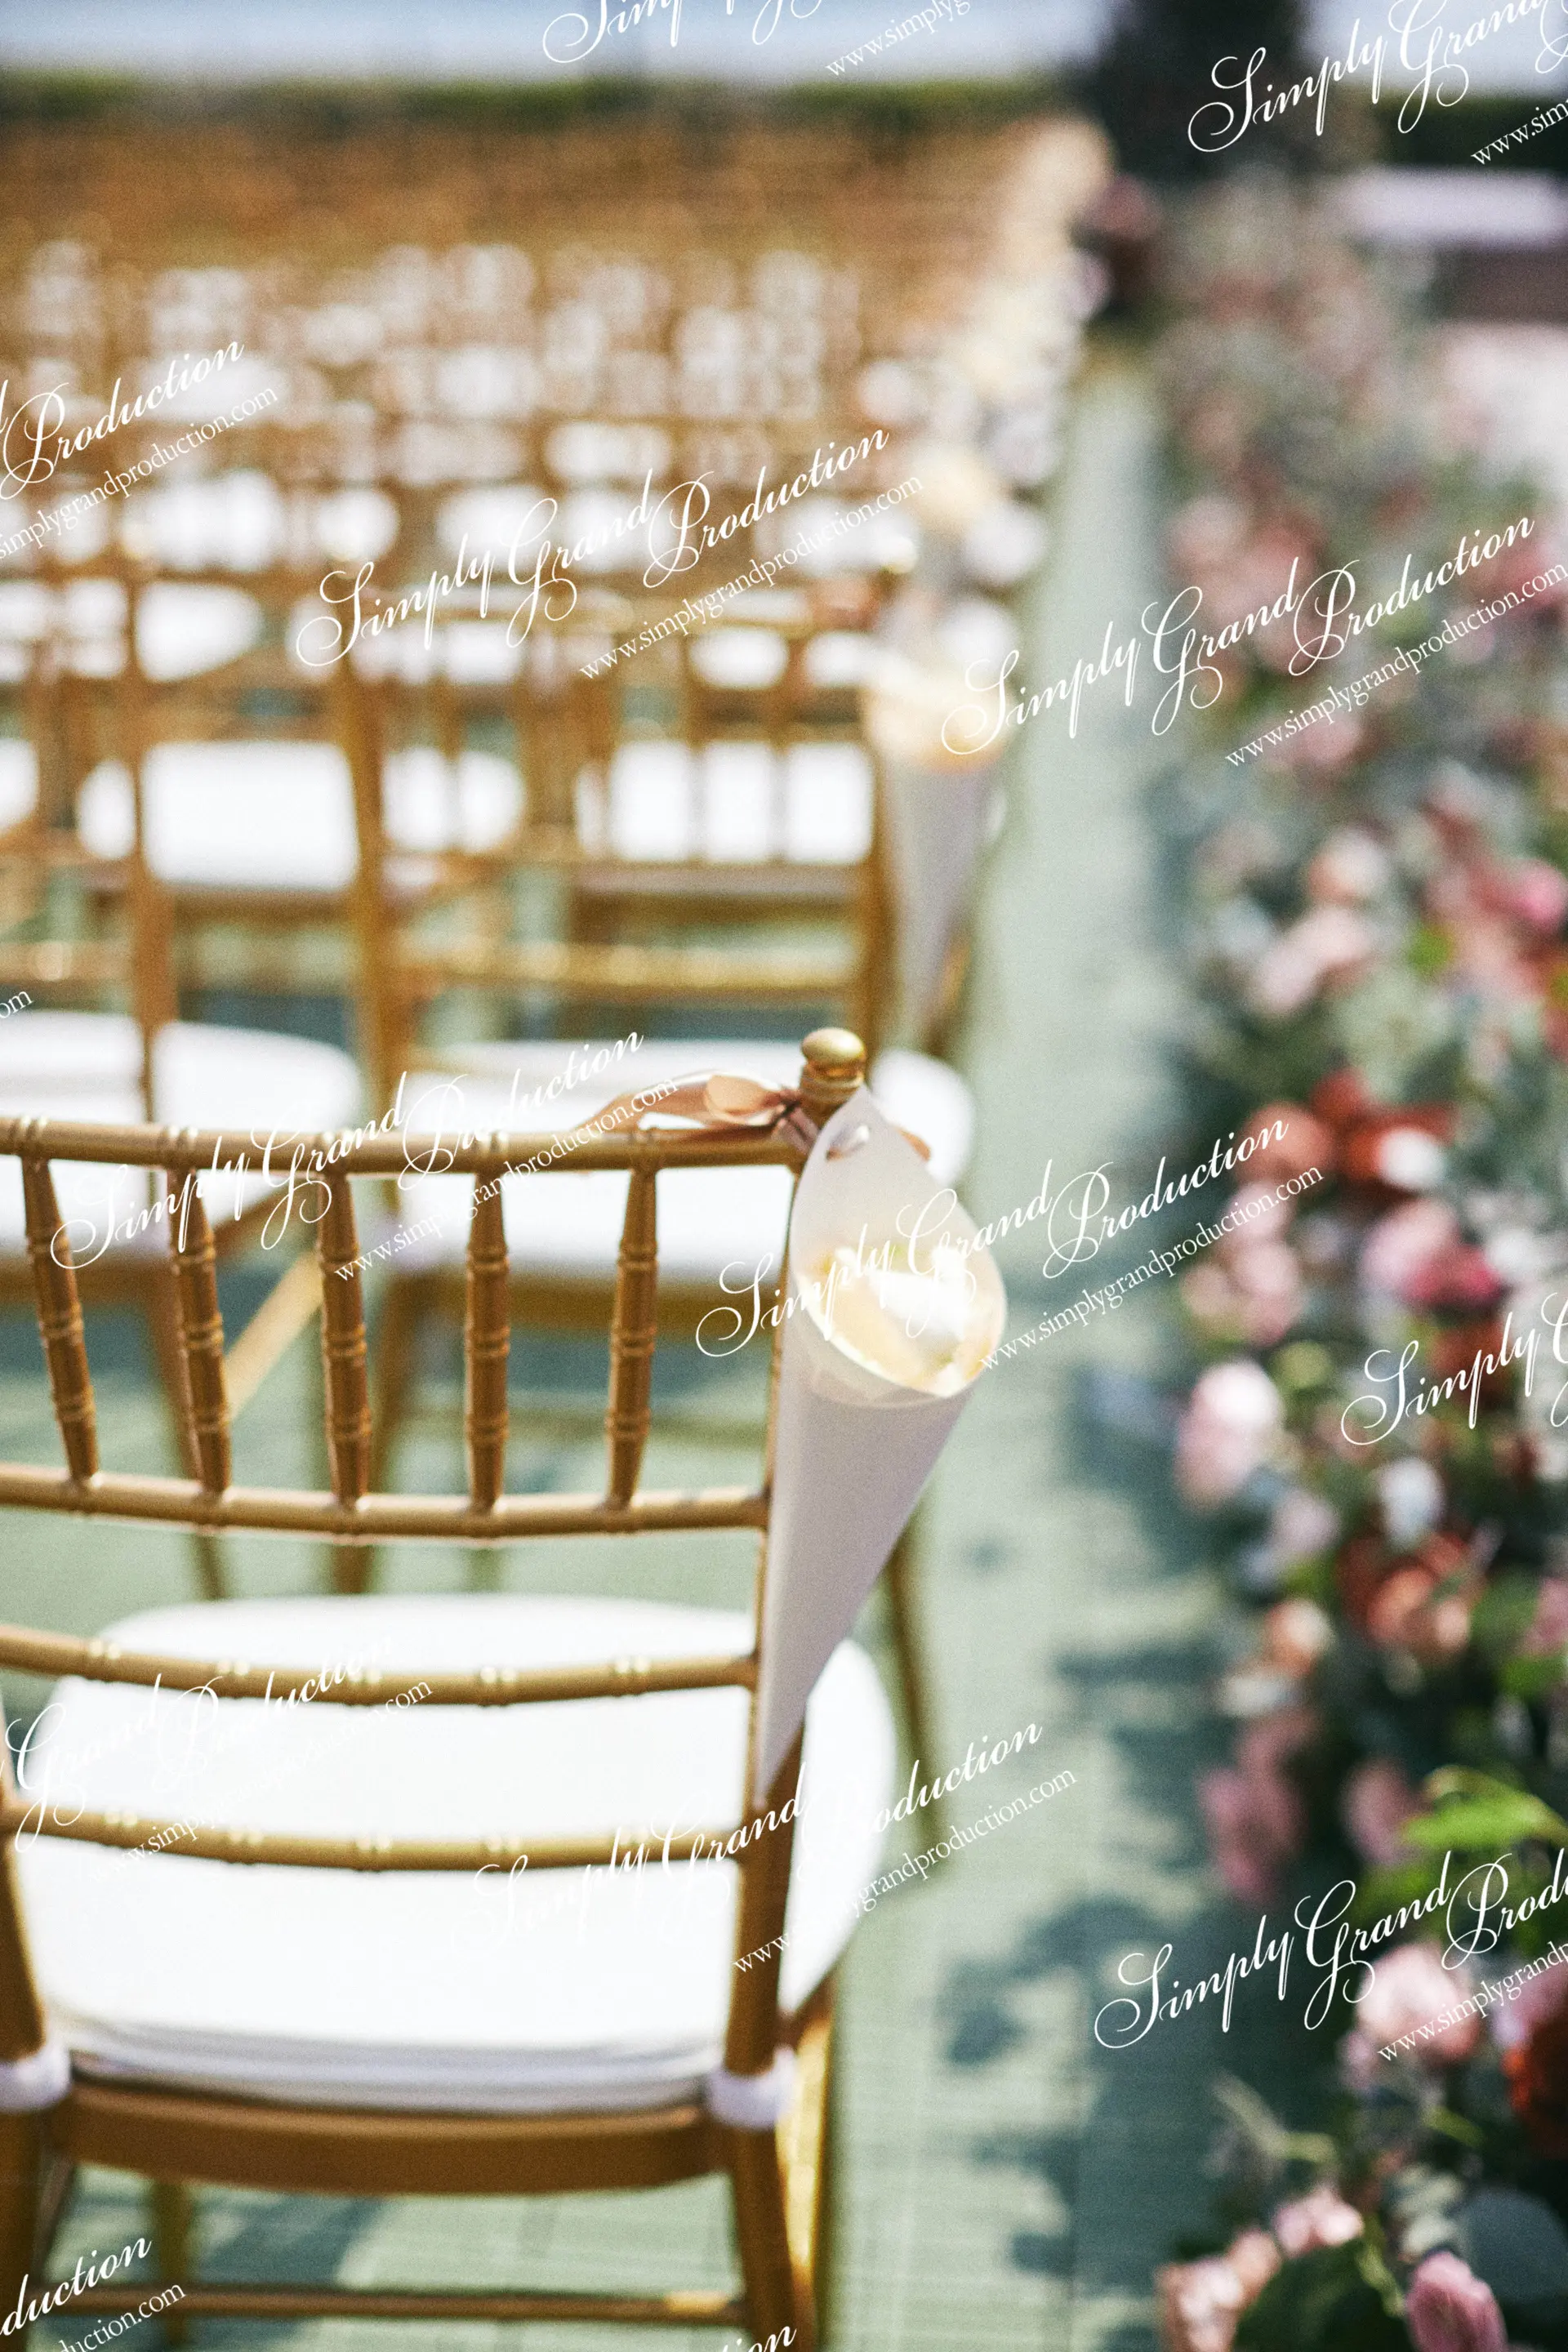 Simply_Grand_Production_Outdoor_wedding_decoration_chair_petal_celebration_Country_Club_2_12.jpg